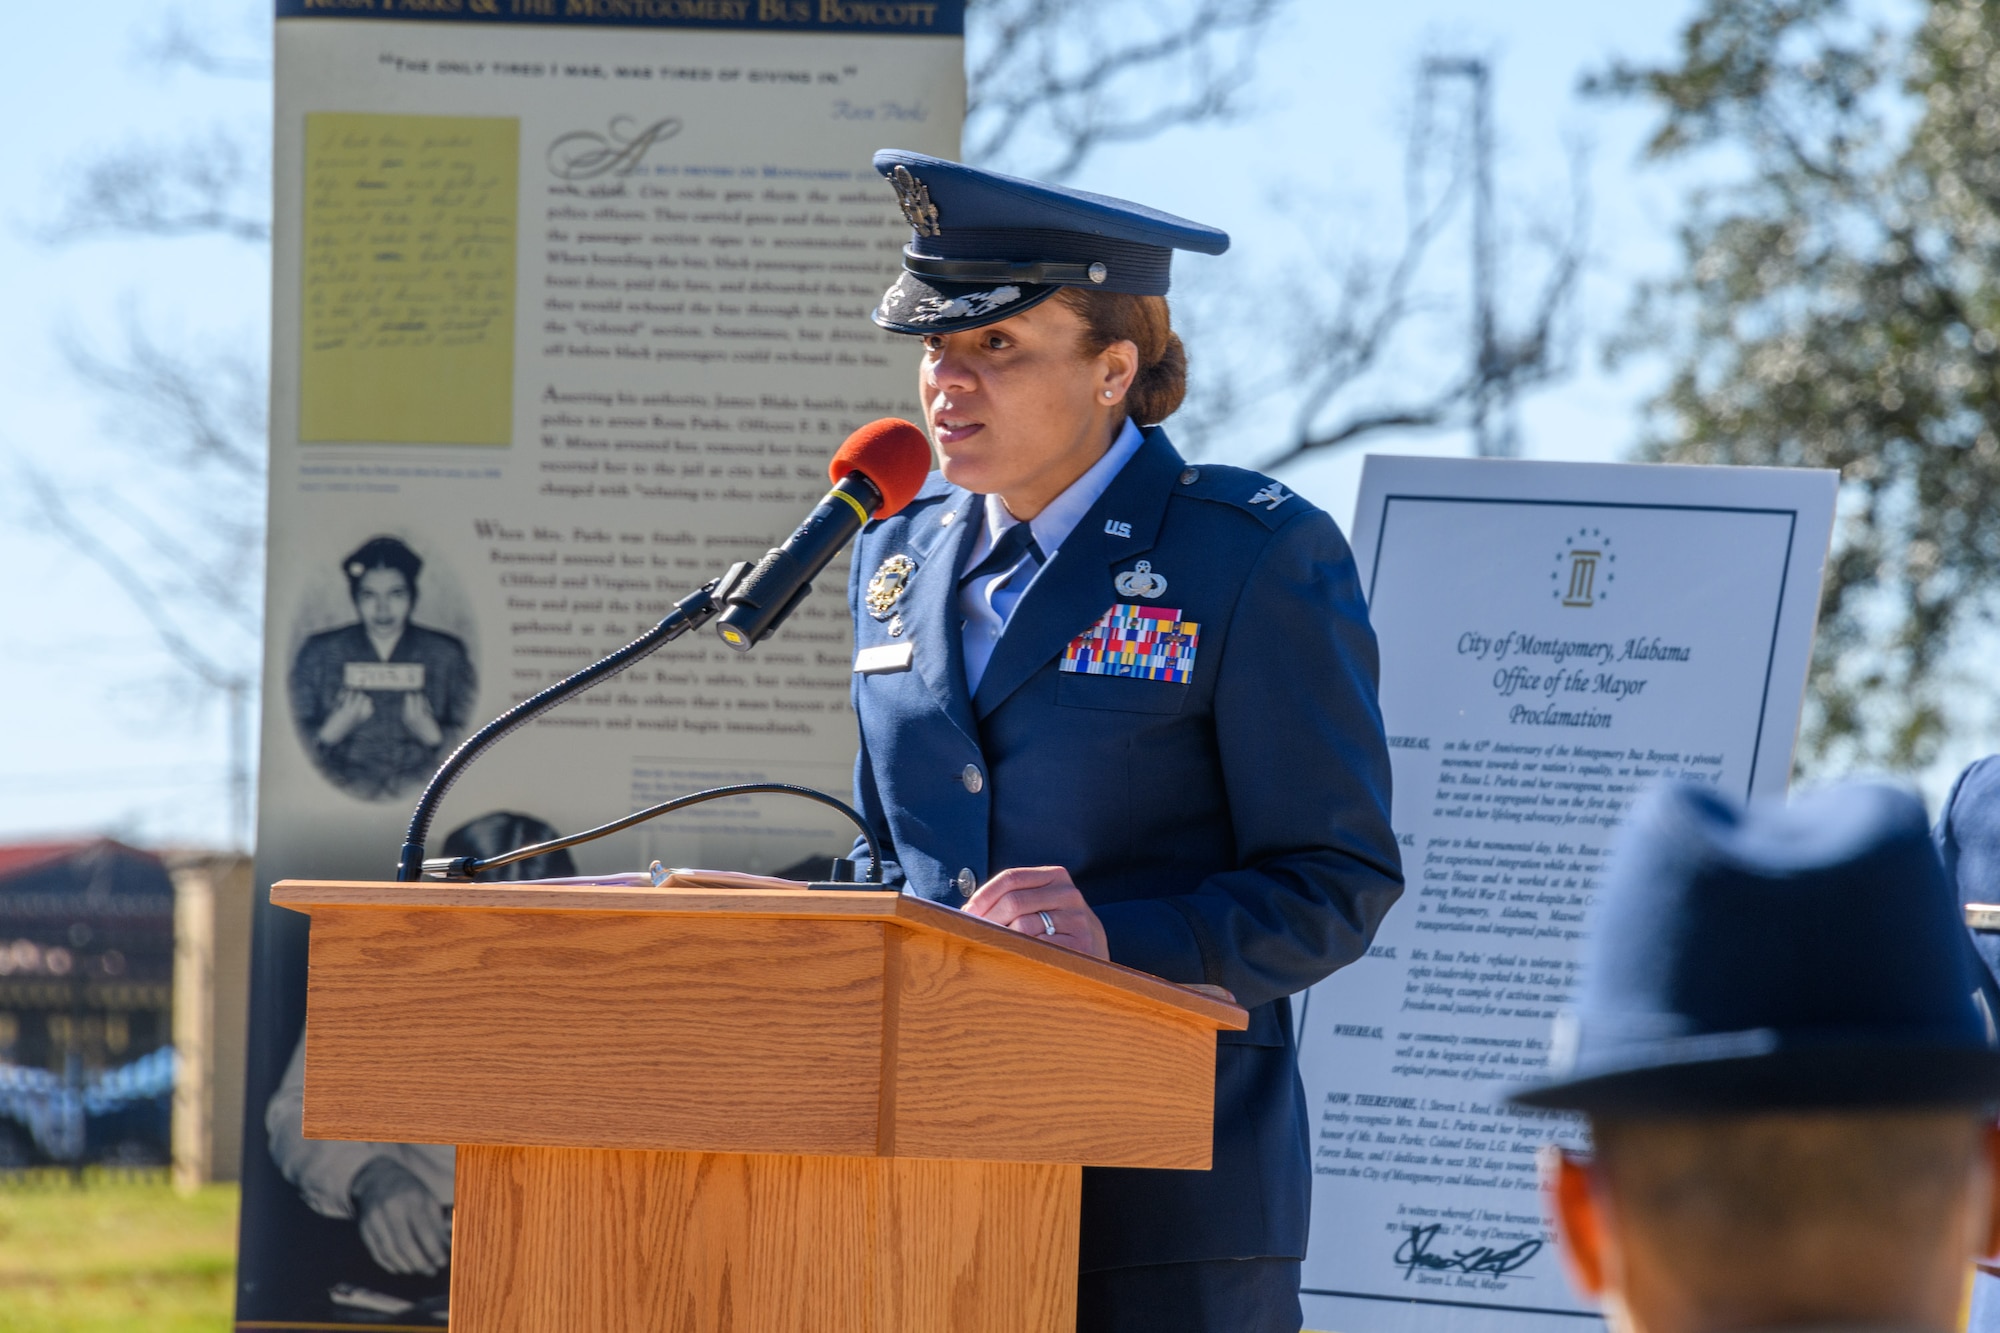 Col. Eries Mentzer, commander of the 42nd Air Base Wing, speaks during a memorialization ceremony on Maxwell Air Force Base, Alabama, Dec. 1, 2020, the 65th anniversary of her arrest for refusing to give up her seat on a Montgomery bus. This event marked the start of a 382-day effort to help increase inclusion so that all Airmen here at Maxwell can rise to their best. To help make this possible, Mentzer formed a team of individuals from around the Maxwell-Gunter community called the Freedom to Serve Initiative, whose goal is to help identify and form solutions to obstacles that may be impeding Airmen’s success. (U.S. Air Force photo by Trey Ward)